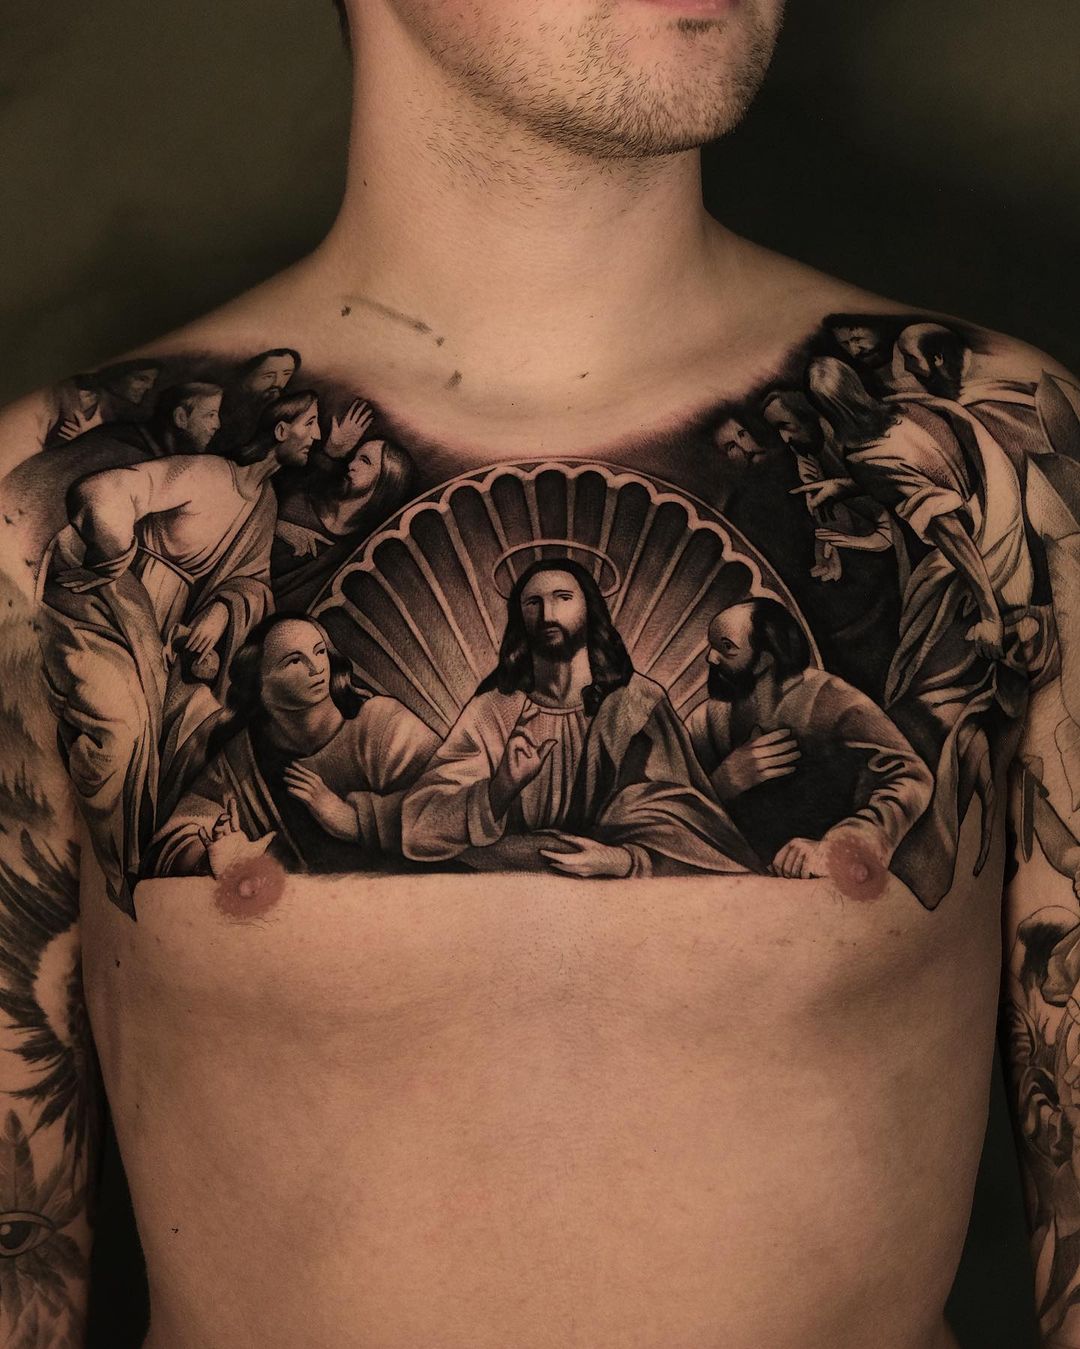 Amazing jesus tattoo on chest by martinrothe